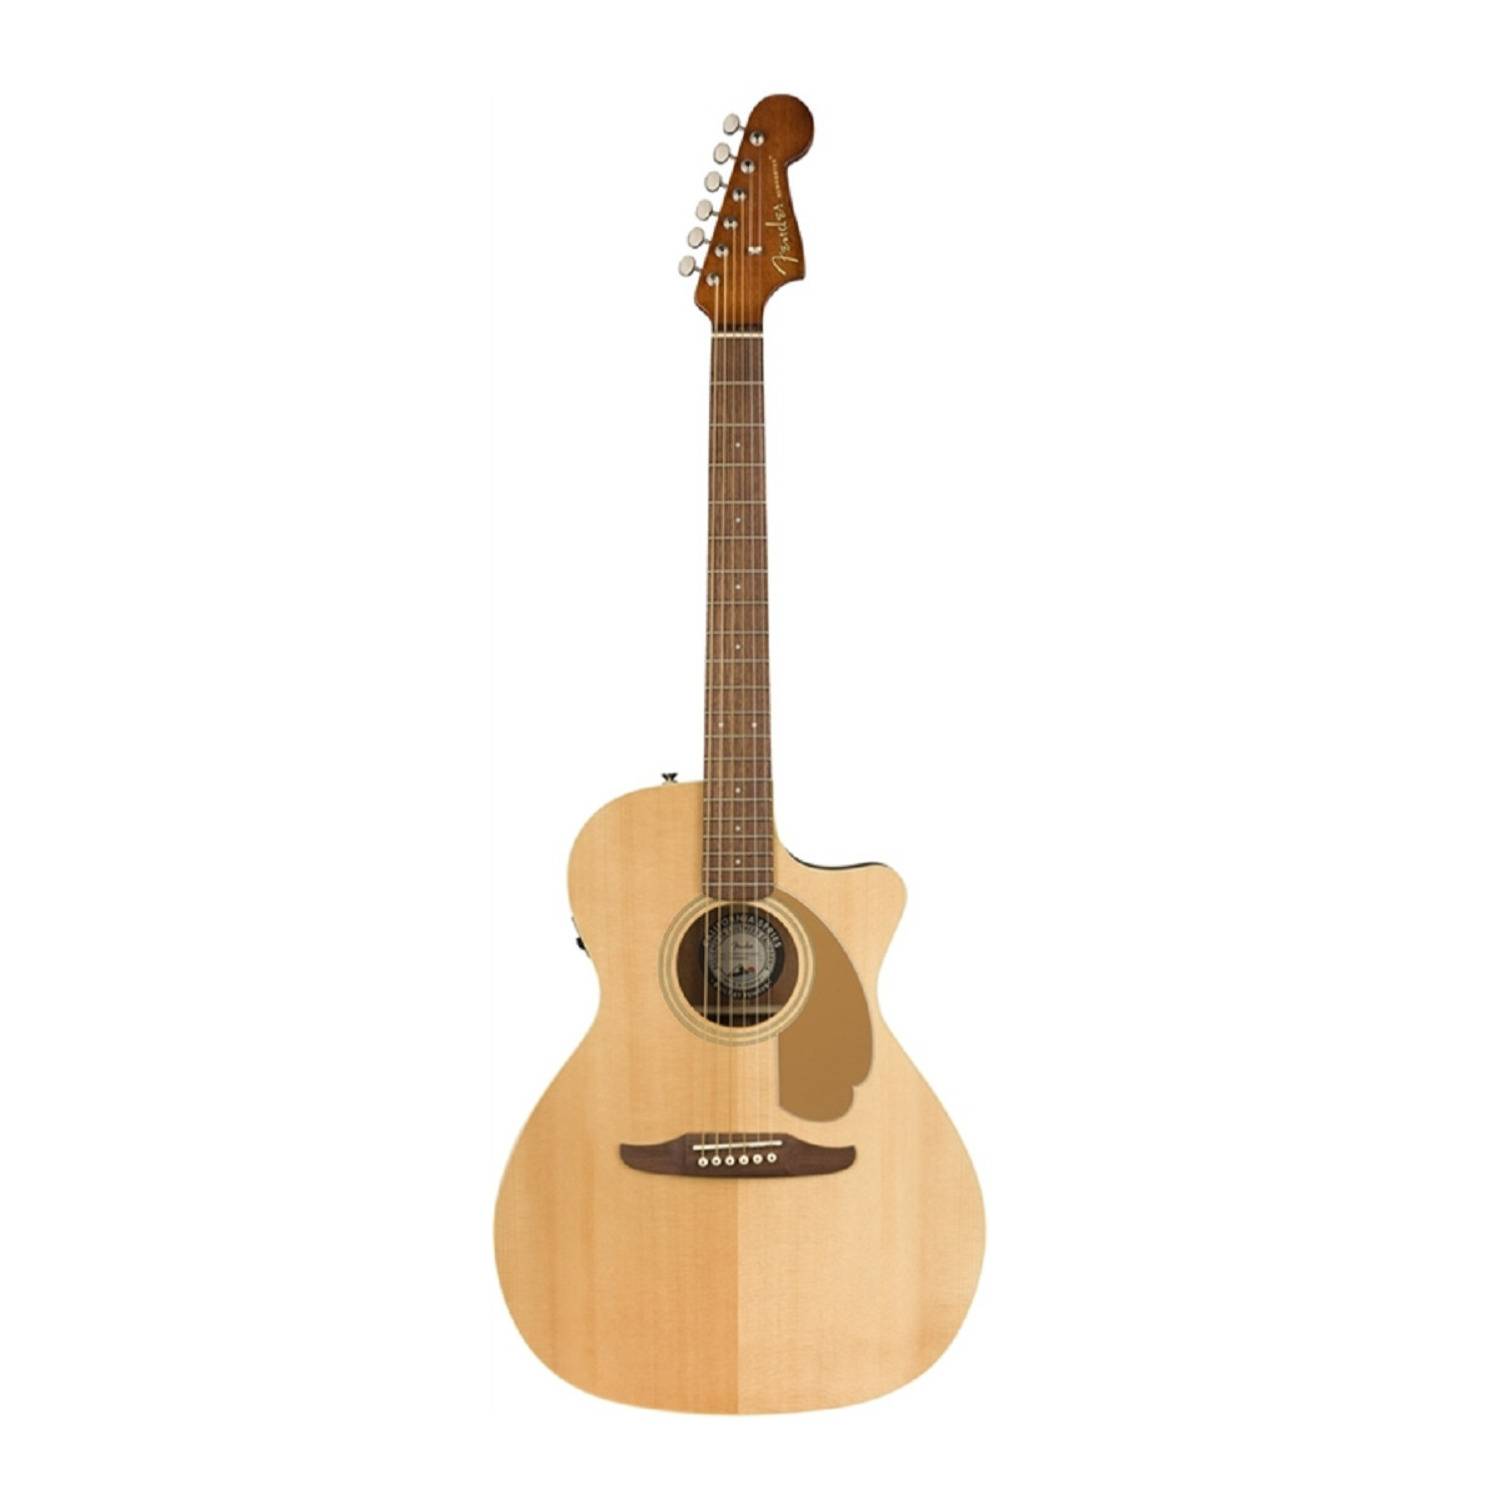 Fender Newporter Player 6-String Acoustic Guitar (Right-Hand, Natural)